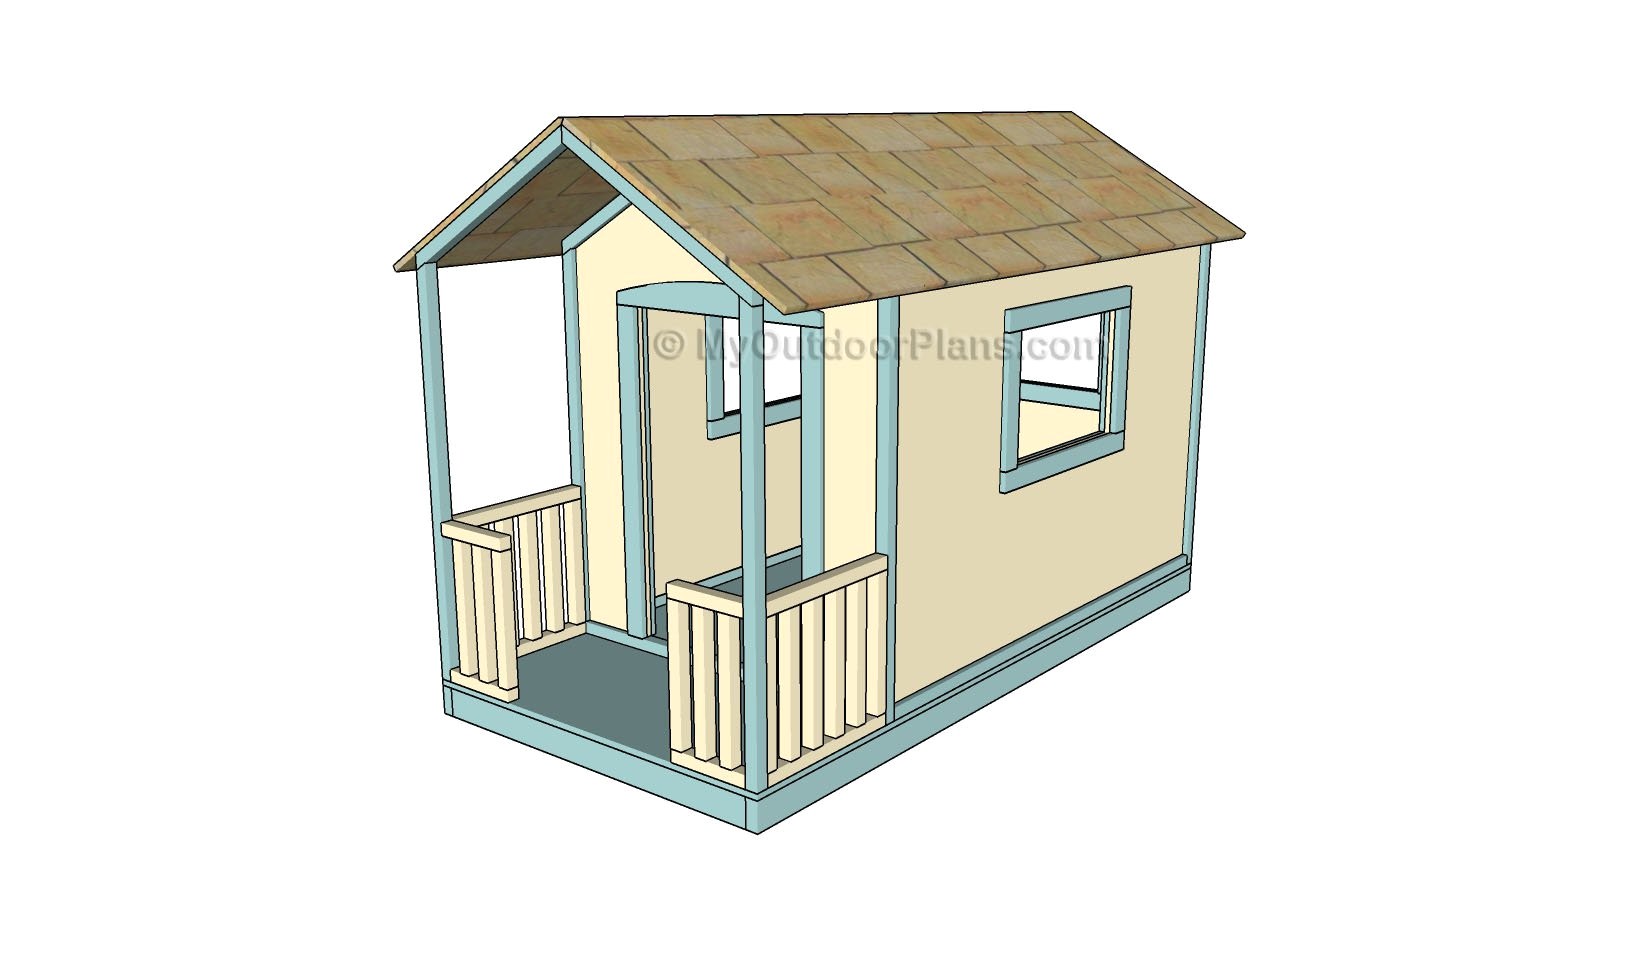 play house plans